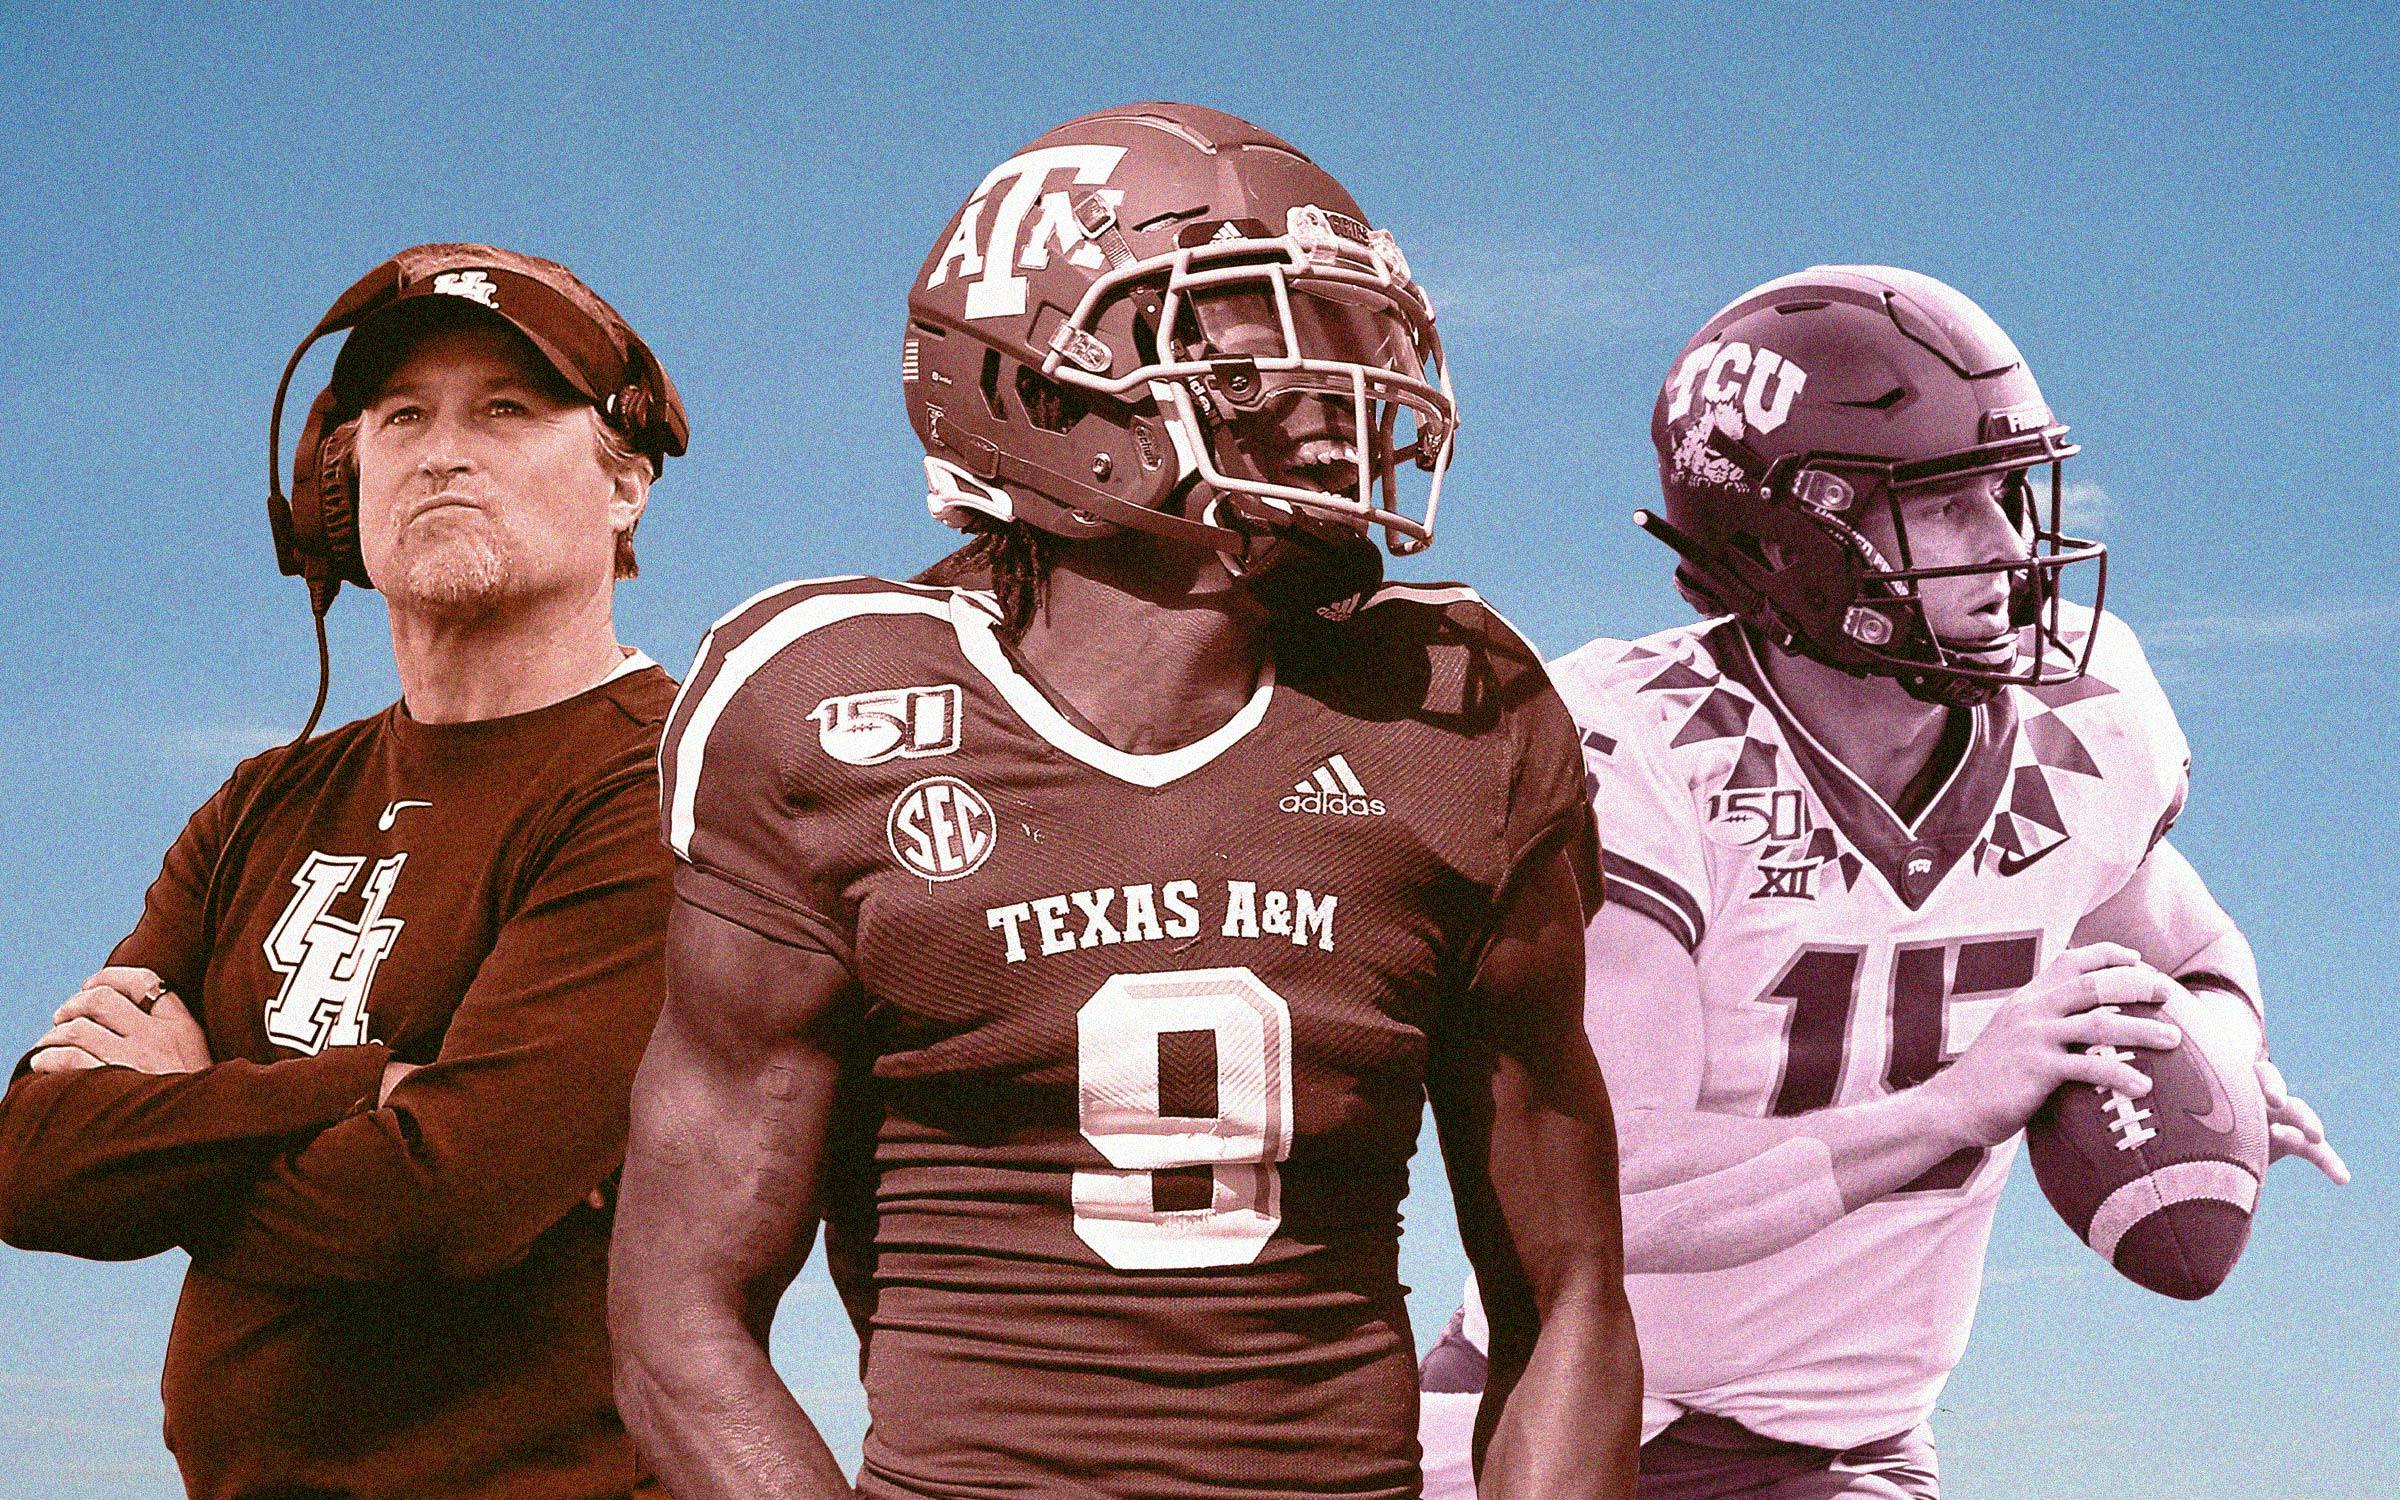 Best in Texas poll (9/6): Longhorns, Aggies fight for top spot; SMU closing  in on top 3